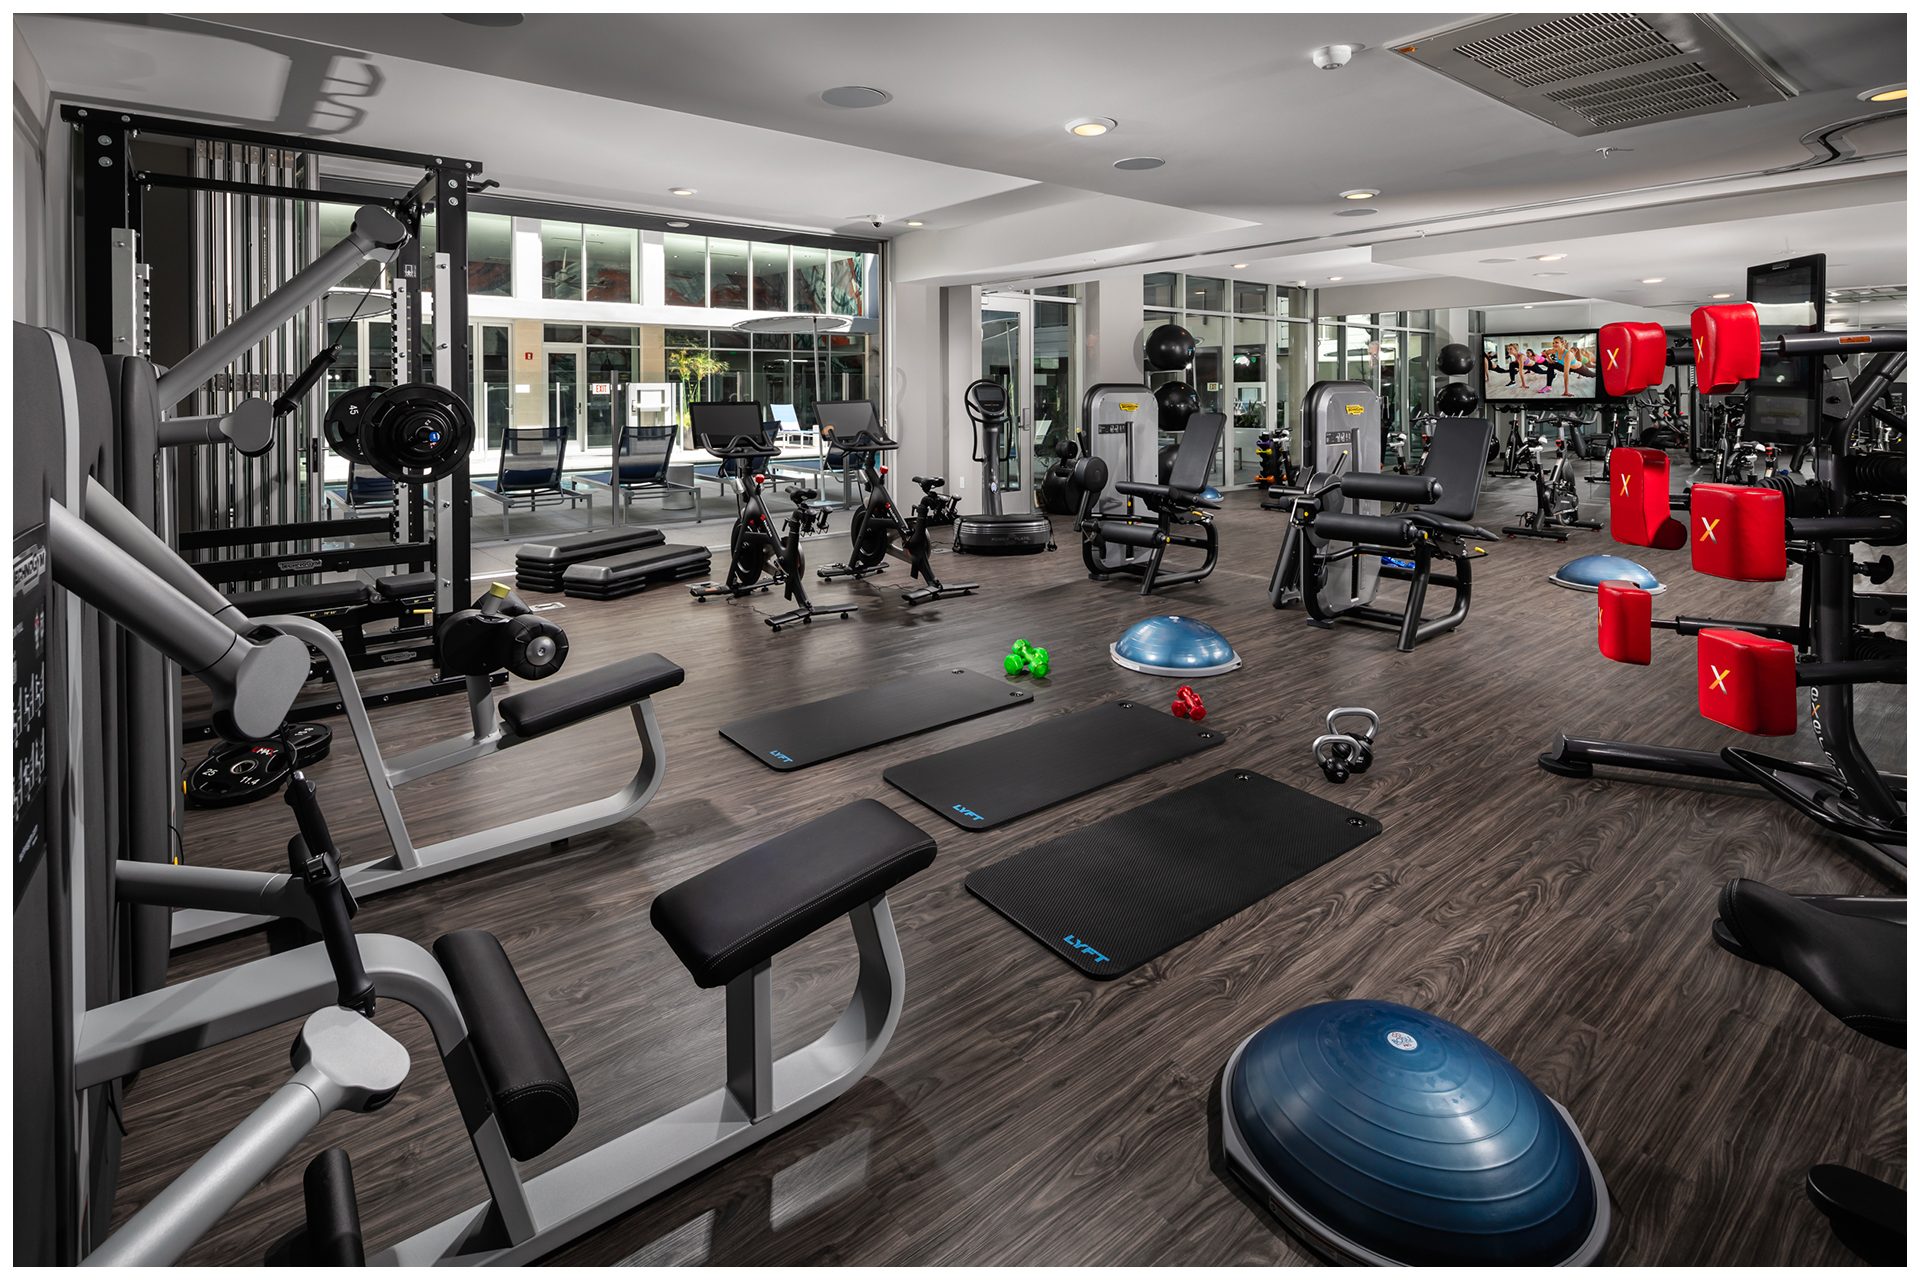 GYM AV PROVISIONSGym Audio & TV & WiFi. Audio Video provisions are controlled via an in-room wall-mounted iPad and remotely from leasing office iPad.